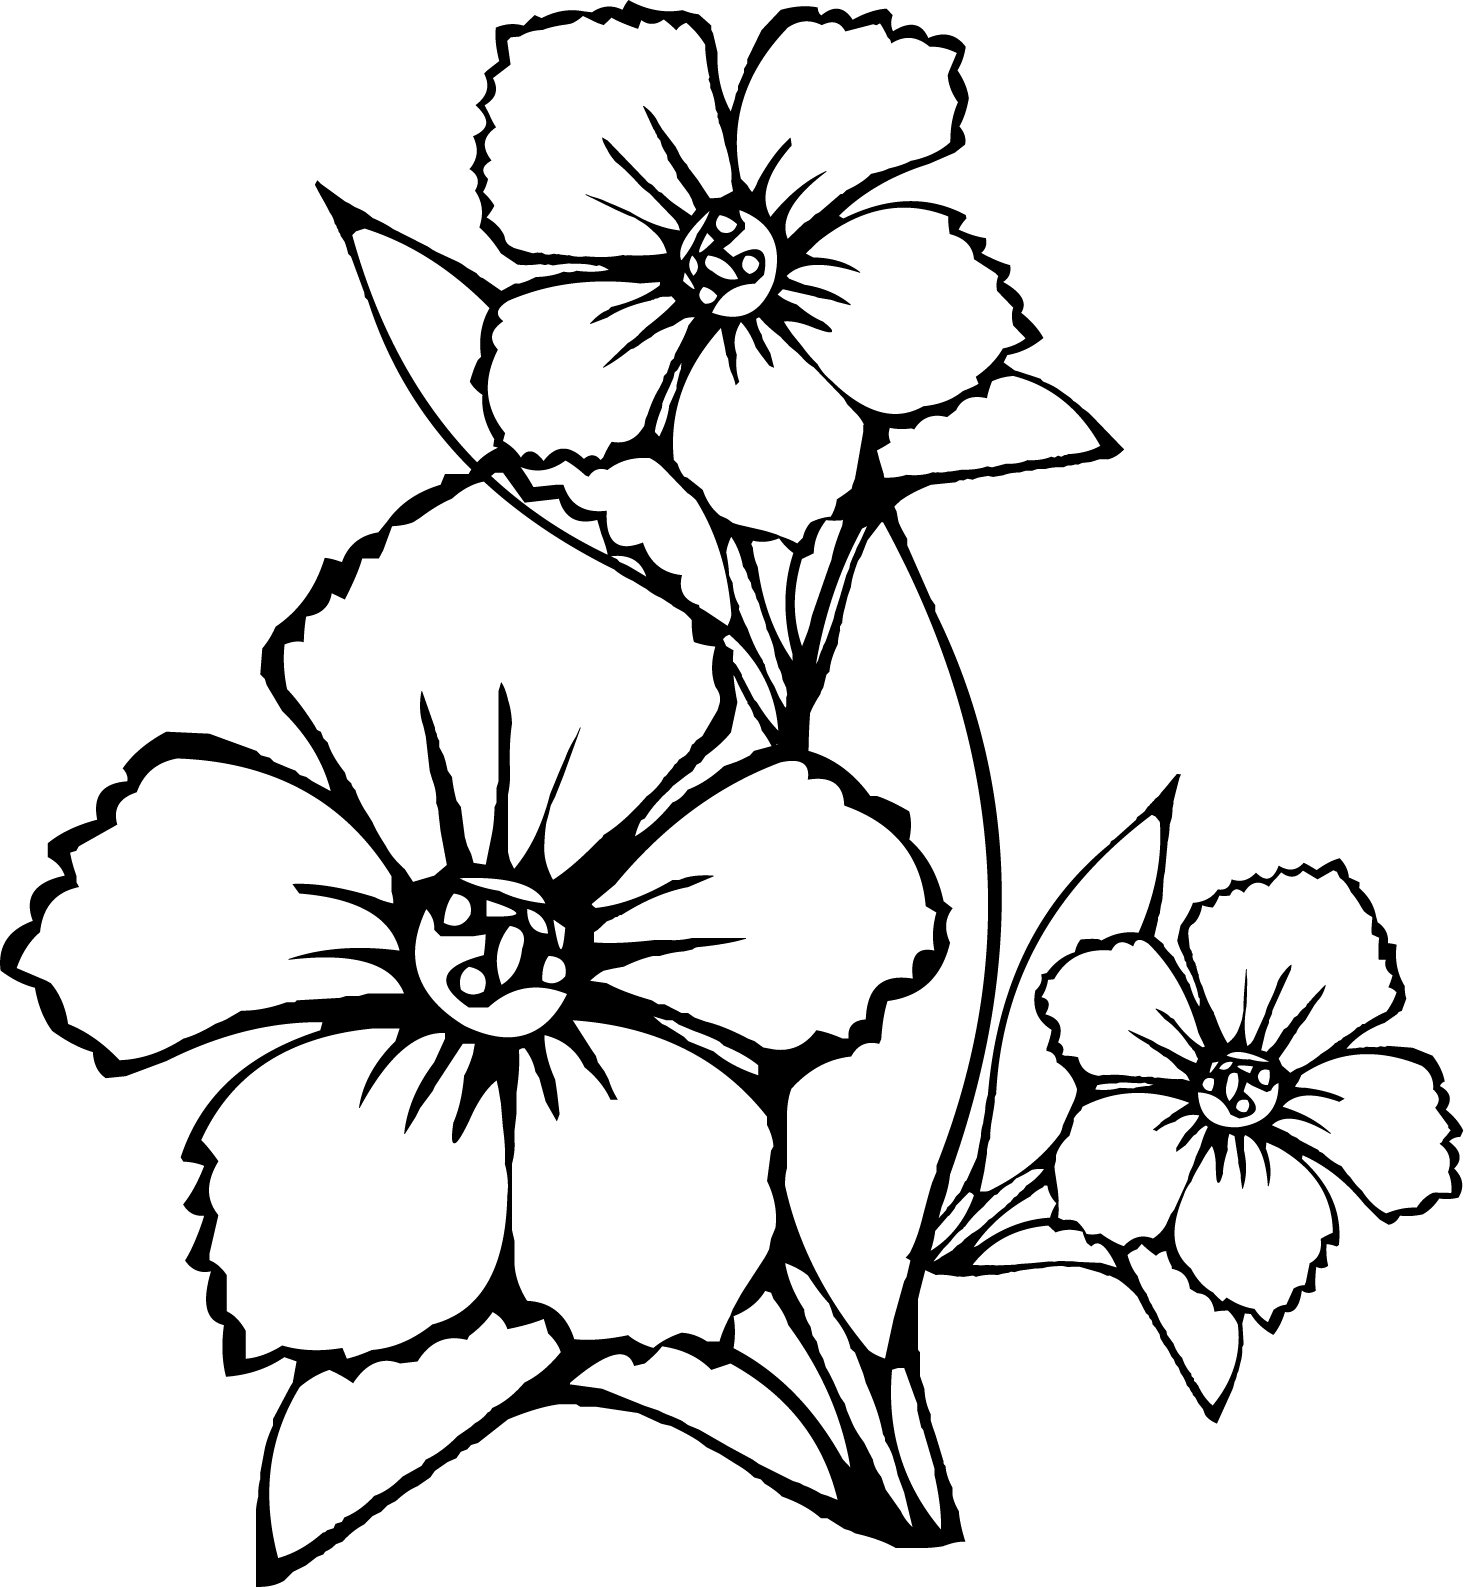 flower coloring page free flower coloring pages for adults flower coloring page page flower coloring 